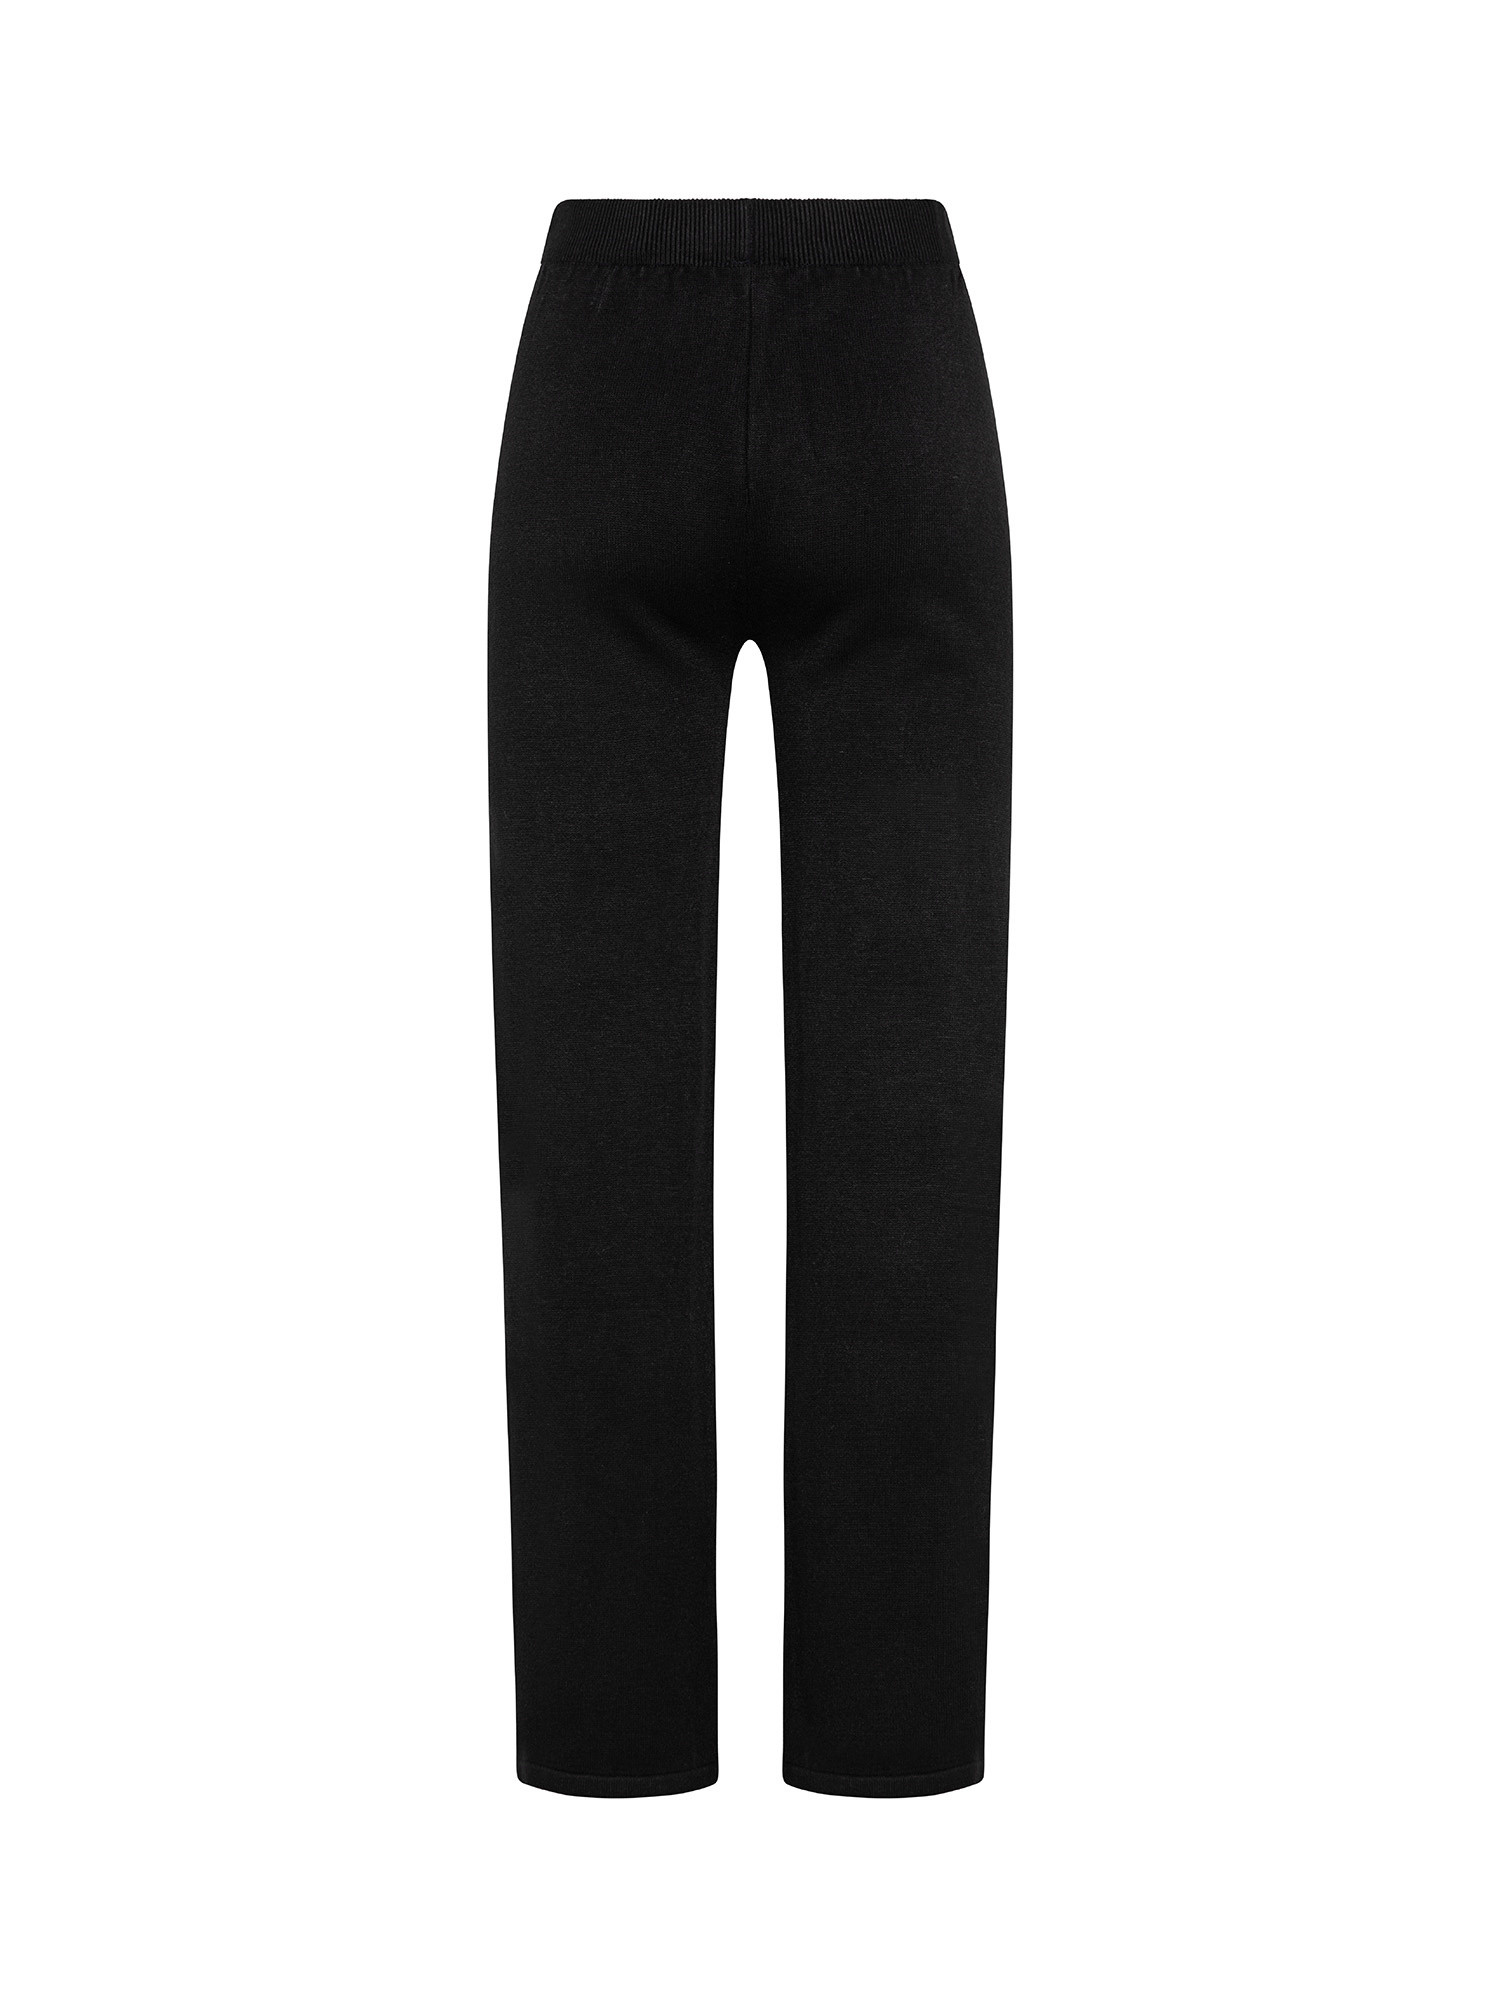 K Collection - Trousers, Black, large image number 1